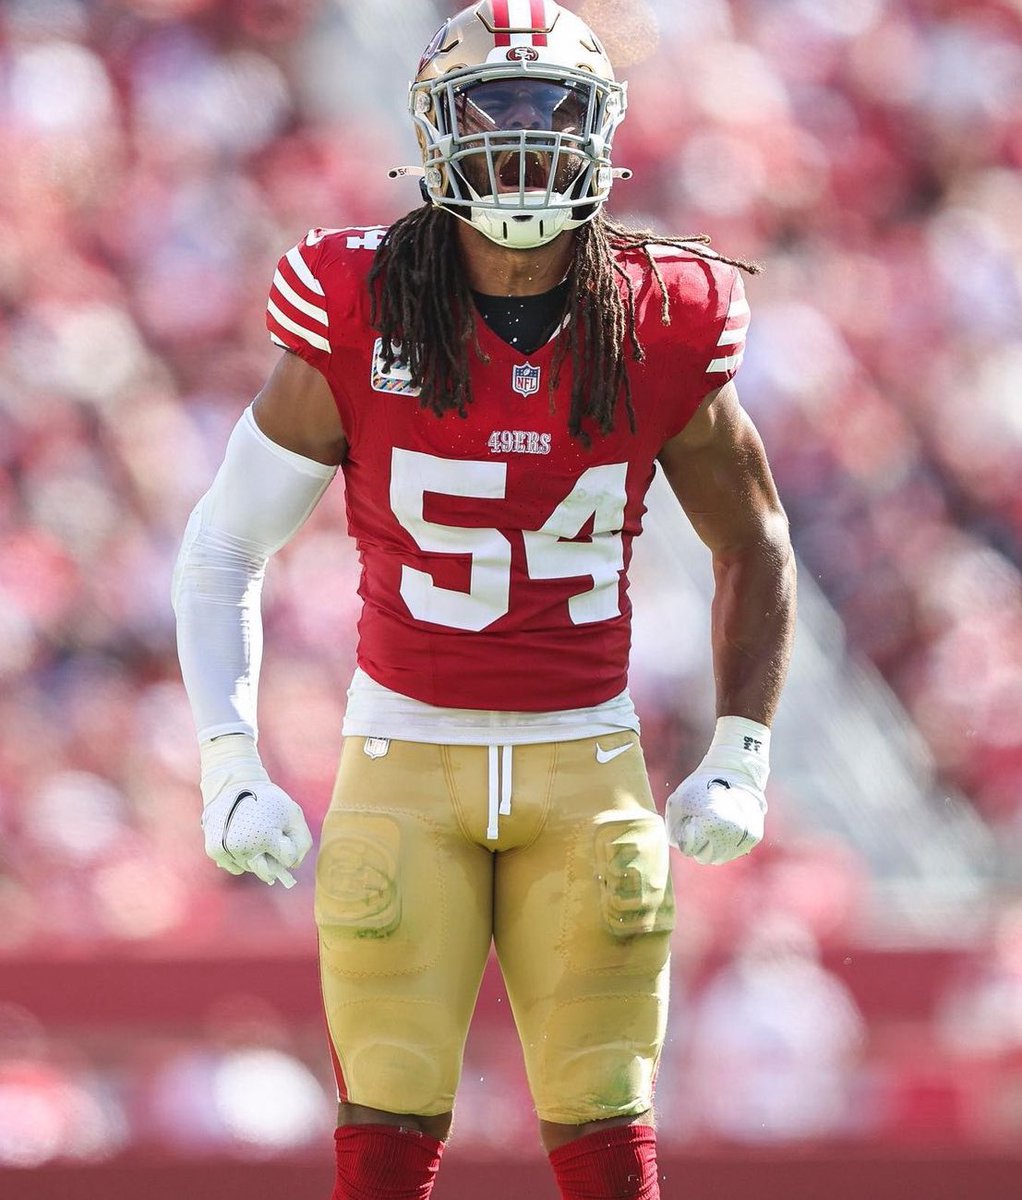 “It’s not a matter of if in my mind, it’s a matter of when we do go win one.” - ALL PRO LB Fred Warner on the #49ers and the Super Bowl